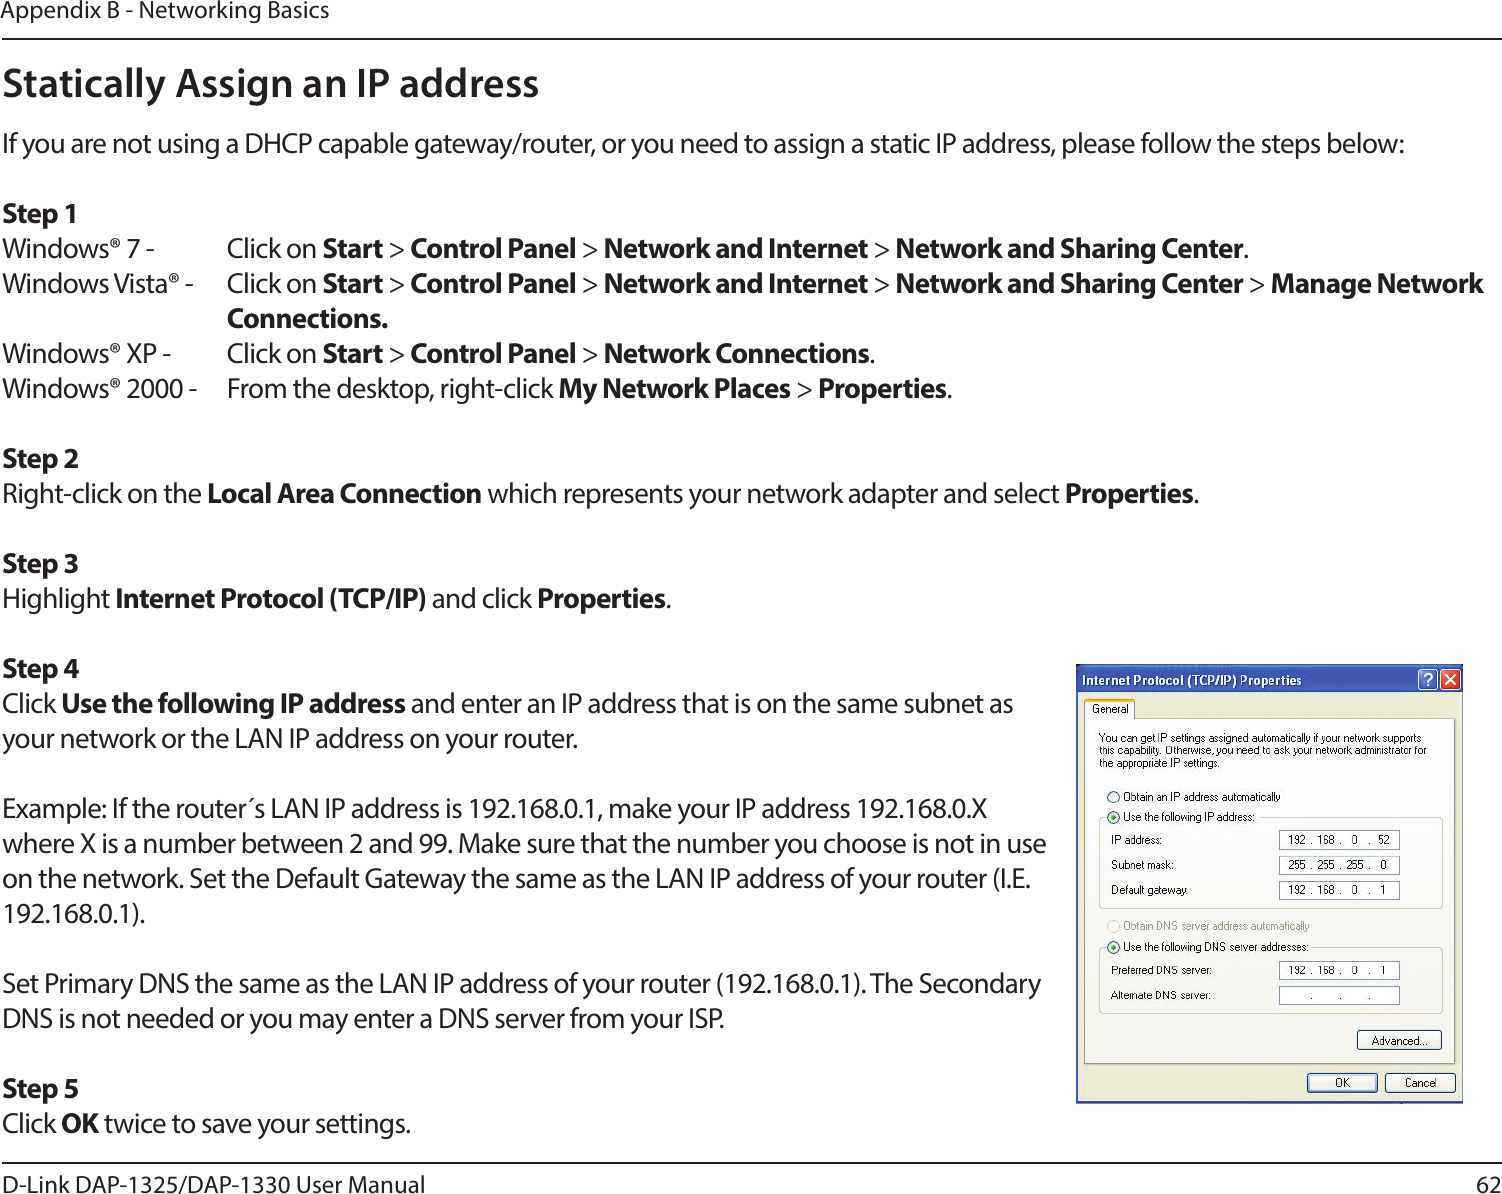 62D-Link DAP-1325/DAP-1330 User ManualAppendix B - Networking BasicsStatically Assign an IP addressIf you are not using a DHCP capable gateway/router, or you need to assign a static IP address, please follow the steps below:Step 1Windows® 7 -  Click on Start &gt; Control Panel &gt; Network and Internet &gt; Network and Sharing Center.Windows Vista® -  Click on Start &gt; Control Panel &gt; Network and Internet &gt; Network and Sharing Center &gt; Manage Network    Connections.Windows® XP -  Click on Start &gt; Control Panel &gt; Network Connections.Windows® 2000 -  From the desktop, right-click My Network Places &gt; Properties.Step 2Right-click on the Local Area Connection which represents your network adapter and select Properties.Step 3Highlight Internet Protocol (TCP/IP) and click Properties.Step 4Click Use the following IP address and enter an IP address that is on the same subnet as your network or the LAN IP address on your router. Example: If the router´s LAN IP address is 192.168.0.1, make your IP address 192.168.0.X where X is a number between 2 and 99. Make sure that the number you choose is not in use on the network. Set the Default Gateway the same as the LAN IP address of your router (I.E. 192.168.0.1). Set Primary DNS the same as the LAN IP address of your router (192.168.0.1). The Secondary DNS is not needed or you may enter a DNS server from your ISP.Step 5Click OK twice to save your settings.